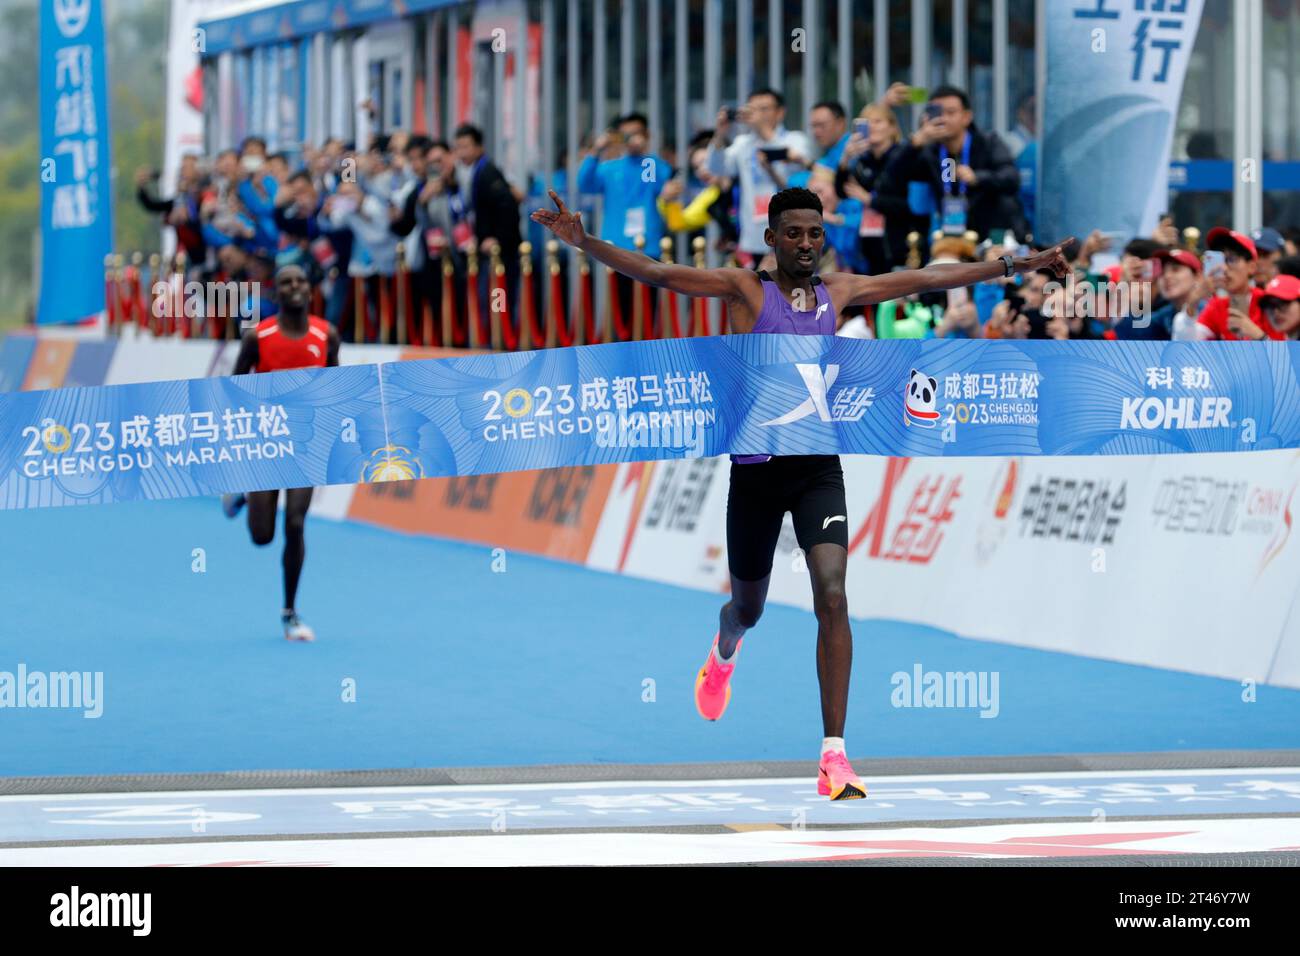 Chengdu, China's Sichuan Province. 29th Oct, 2023. Gebre Mekuant Ayenew (R) of Ethiopia competes during the 2023 Chengdu Marathon in Chengdu, southwest China's Sichuan Province, Oct. 29, 2023. Credit: Shen Bohan/Xinhua/Alamy Live News Stock Photo